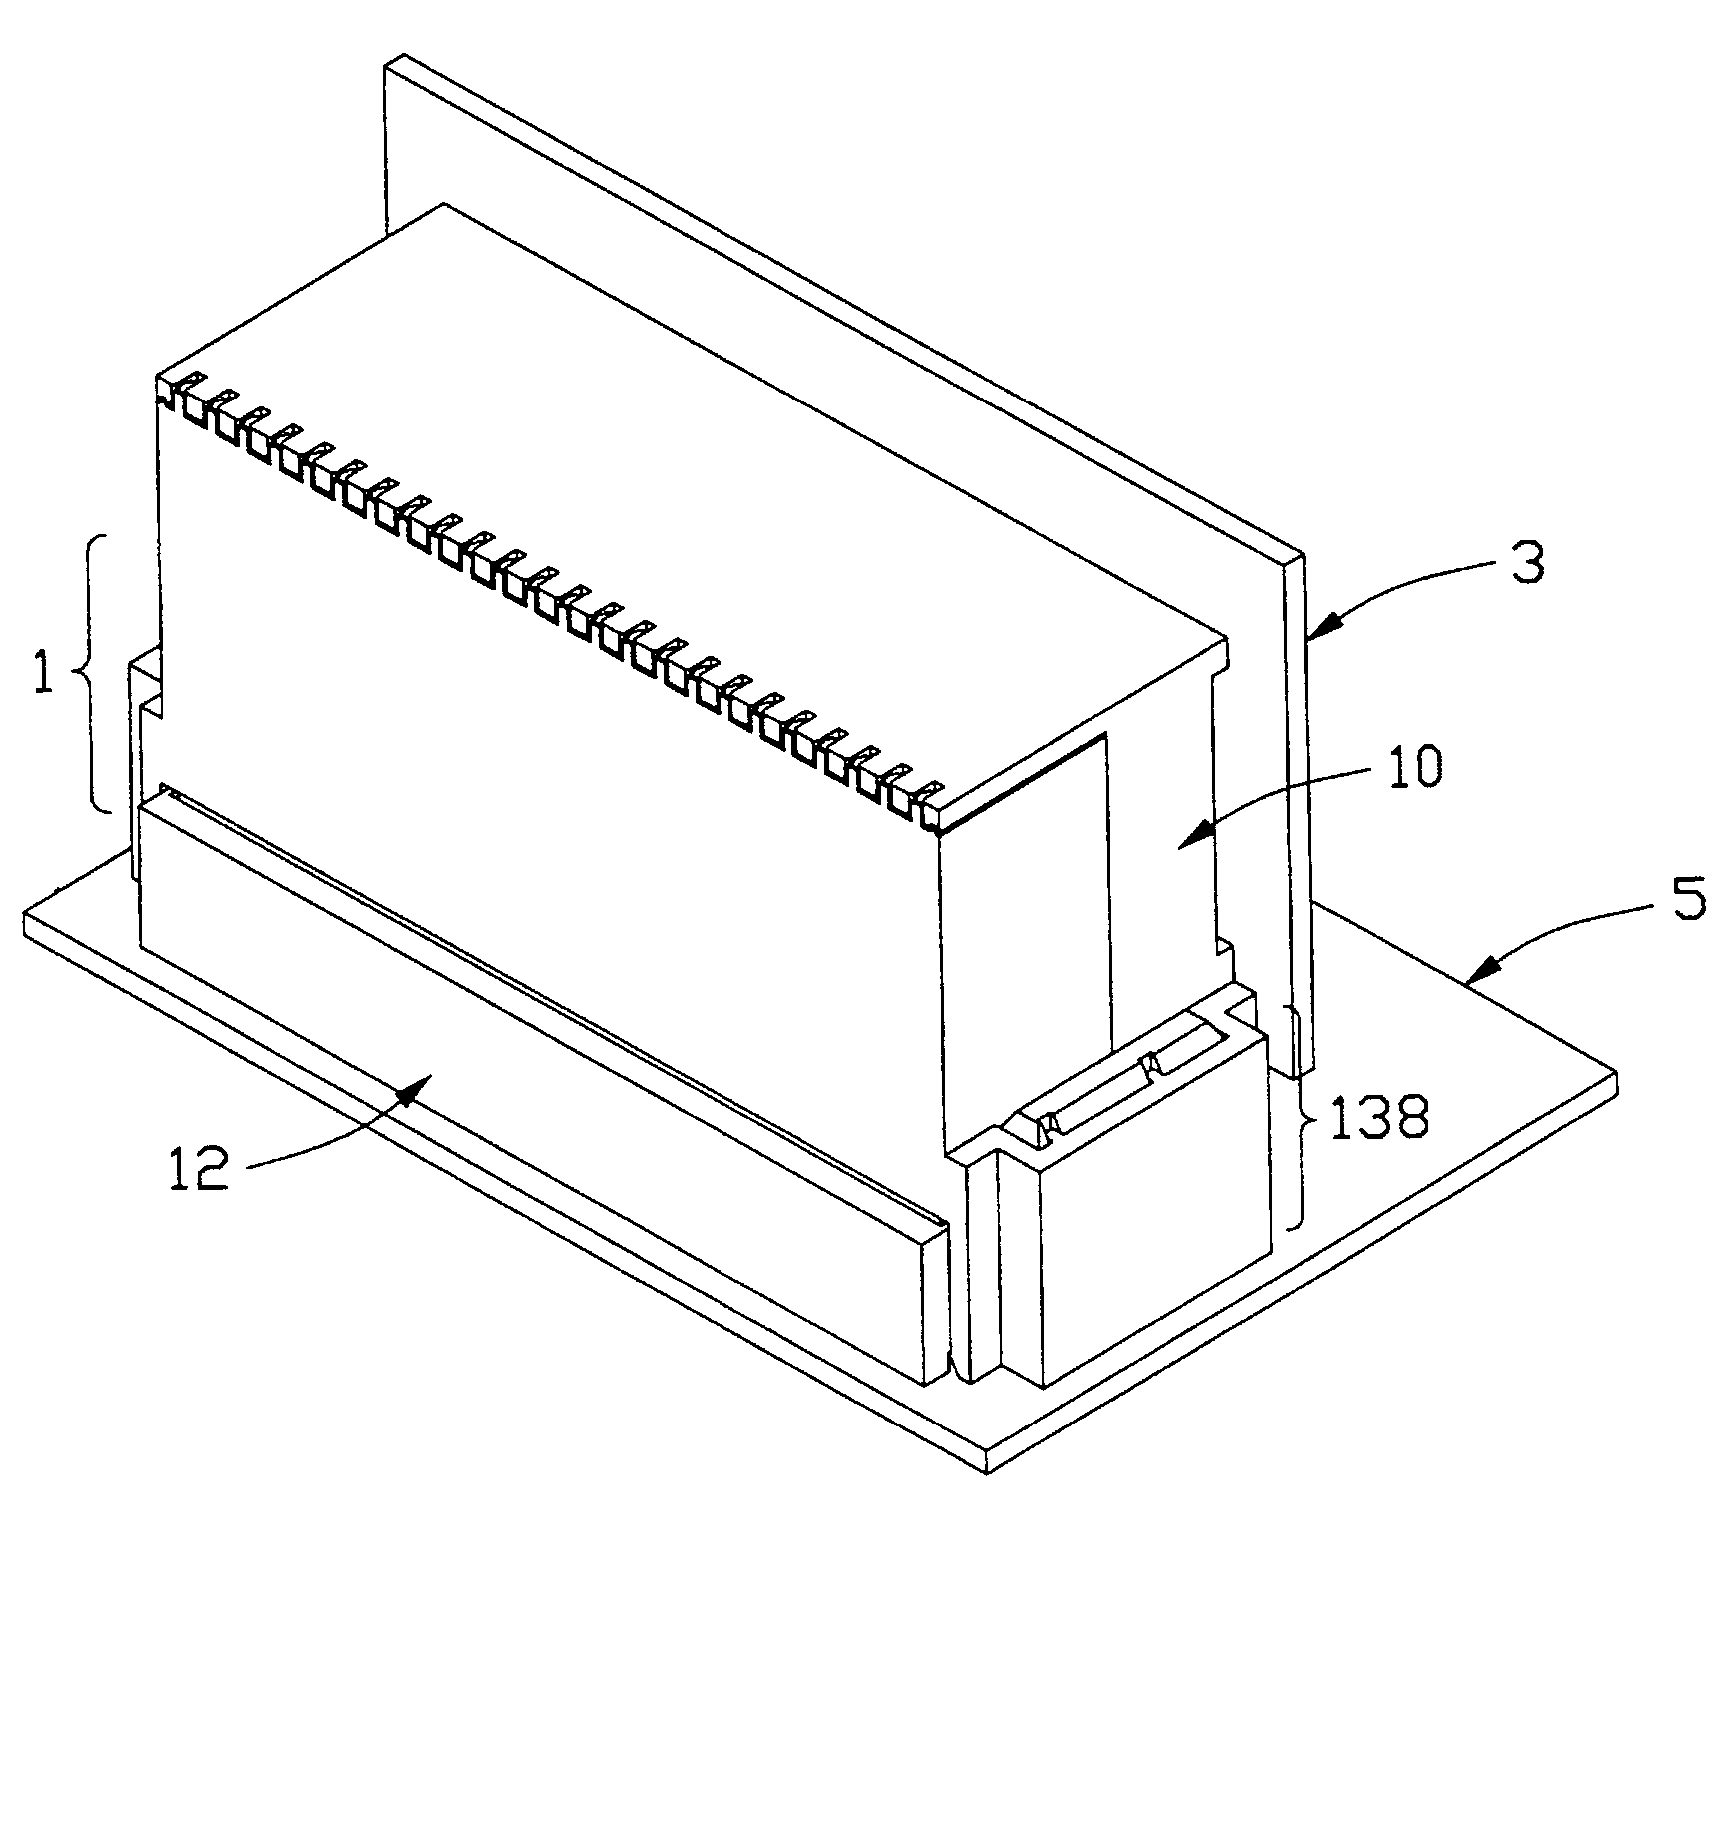 Electrical connector assembly having improved guiding means